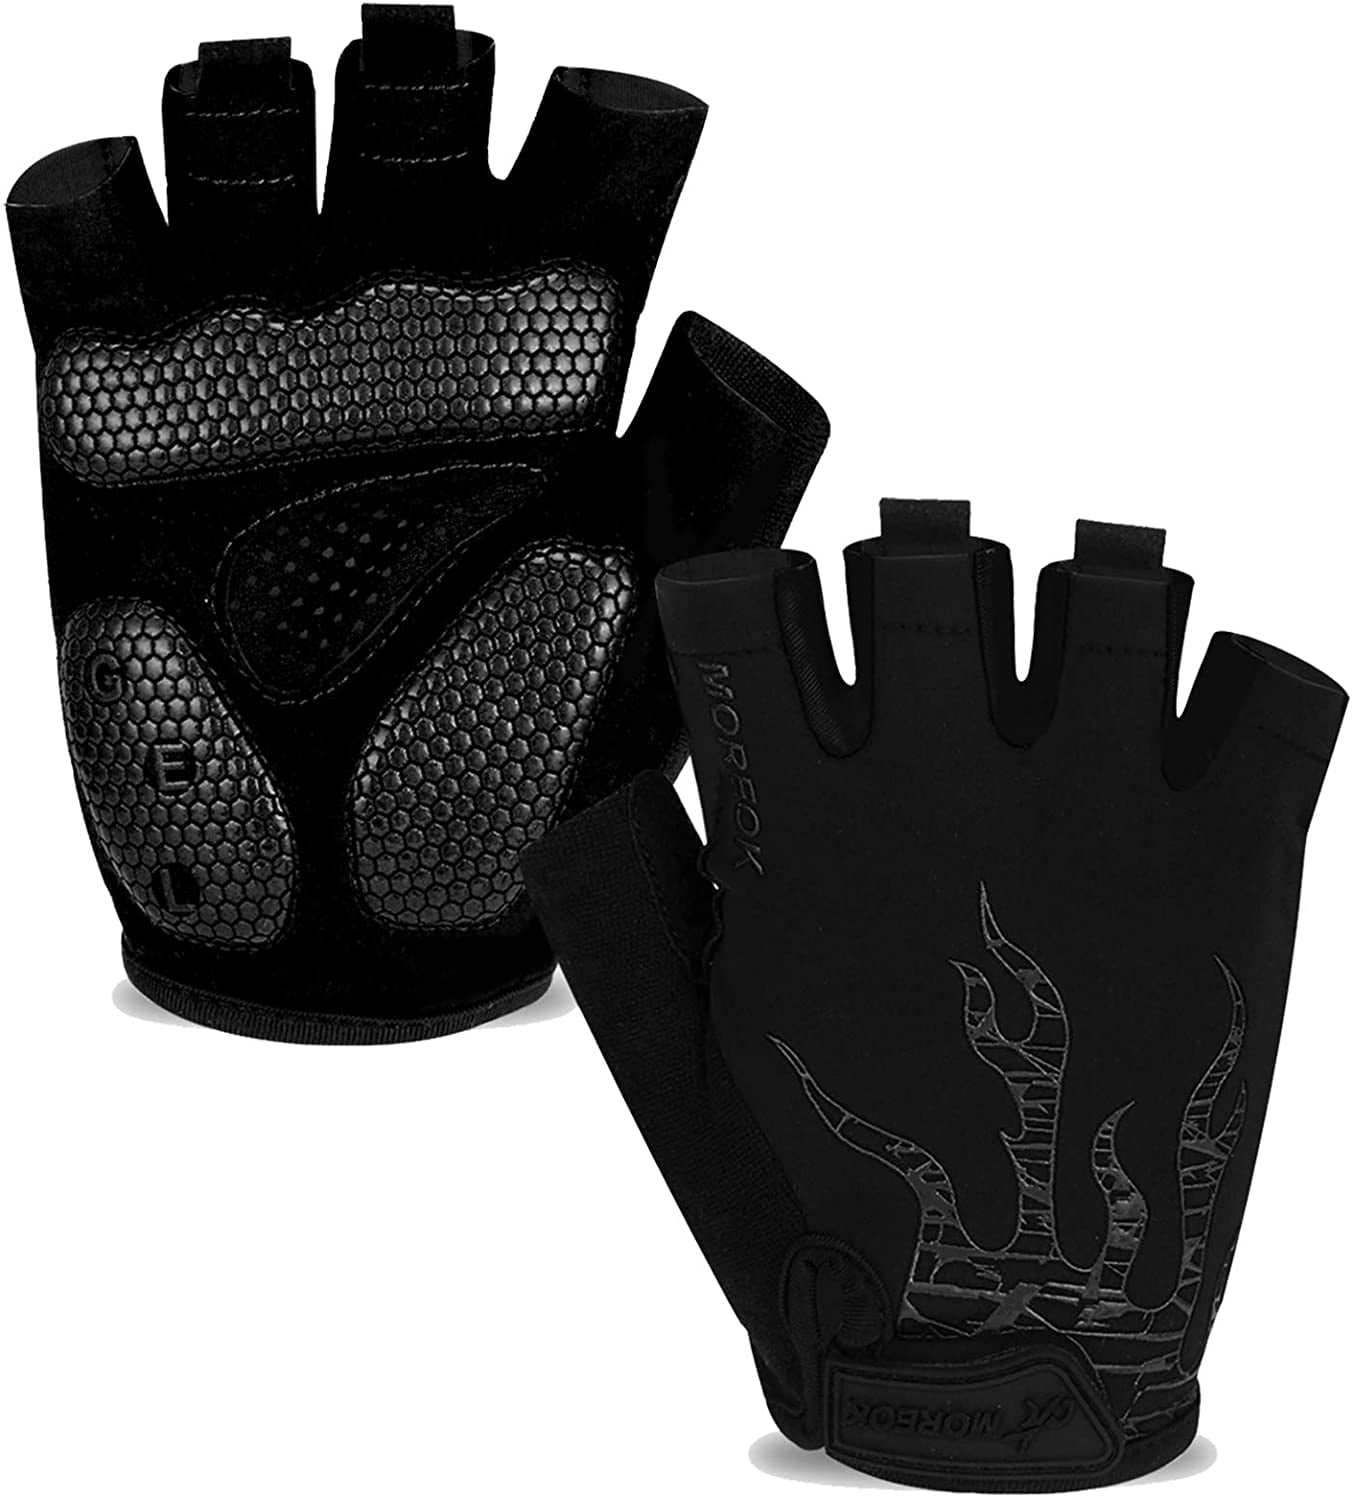 Men Road and Mountain Biking Half Finger with Pull Tabs RocRide Cycling Gloves with Gel Padded Protection Women and Children Sizes.